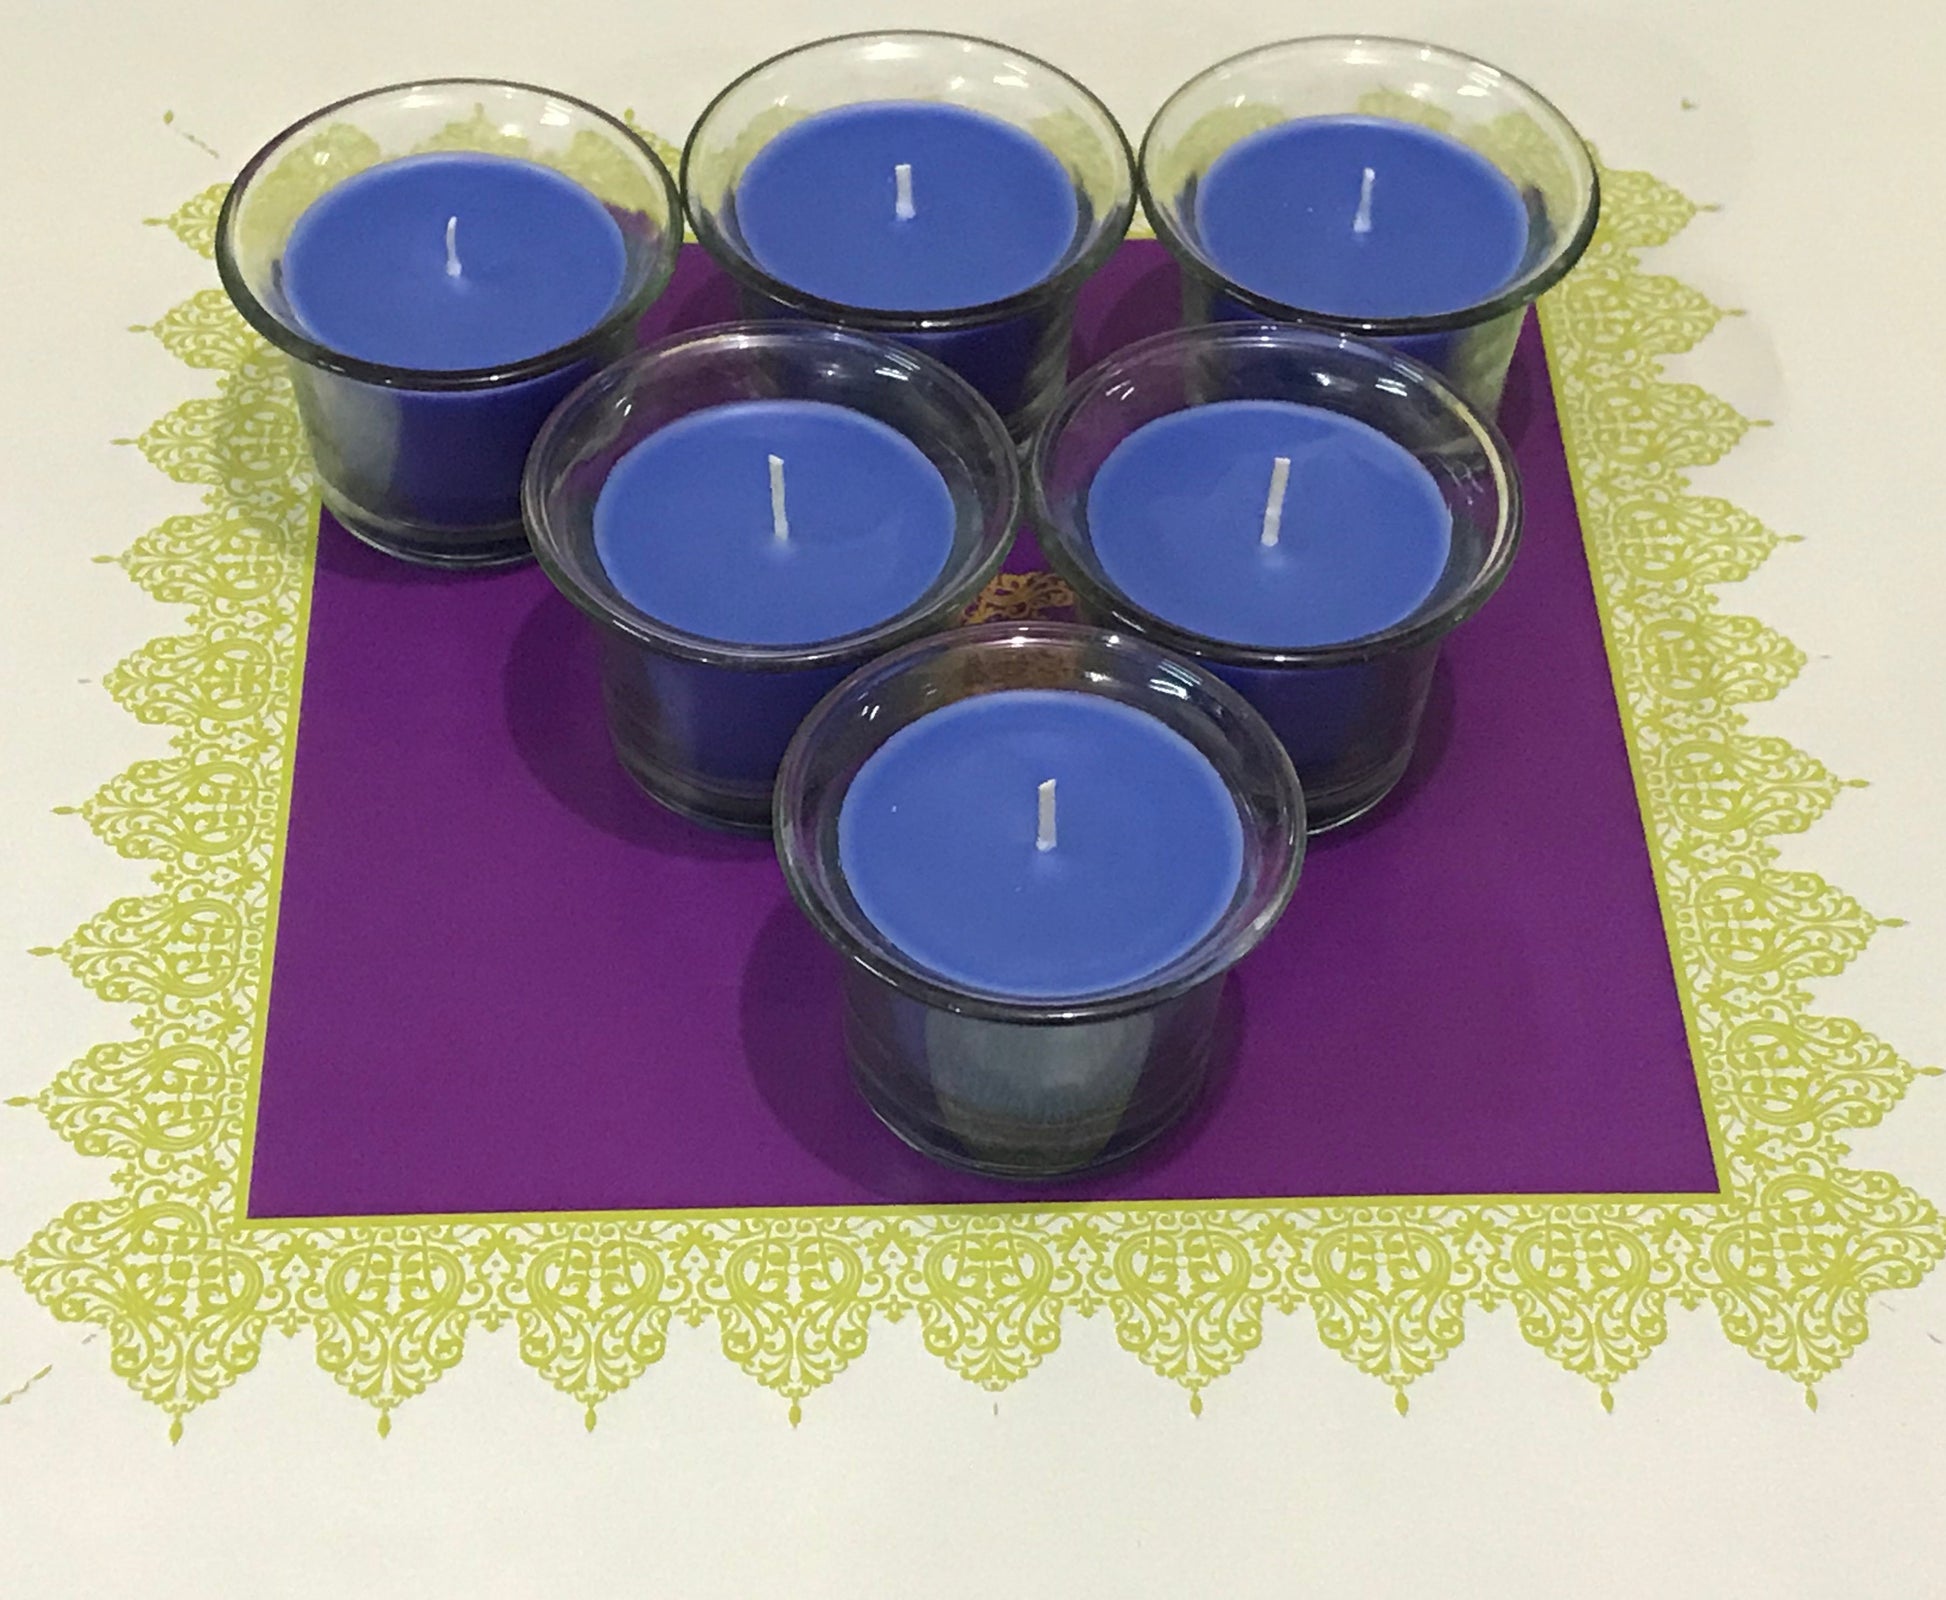 Hosley Highly Fragranced Lavender Filled Votive Glass Candles / Decoration Candles, Pack of 6, Purple